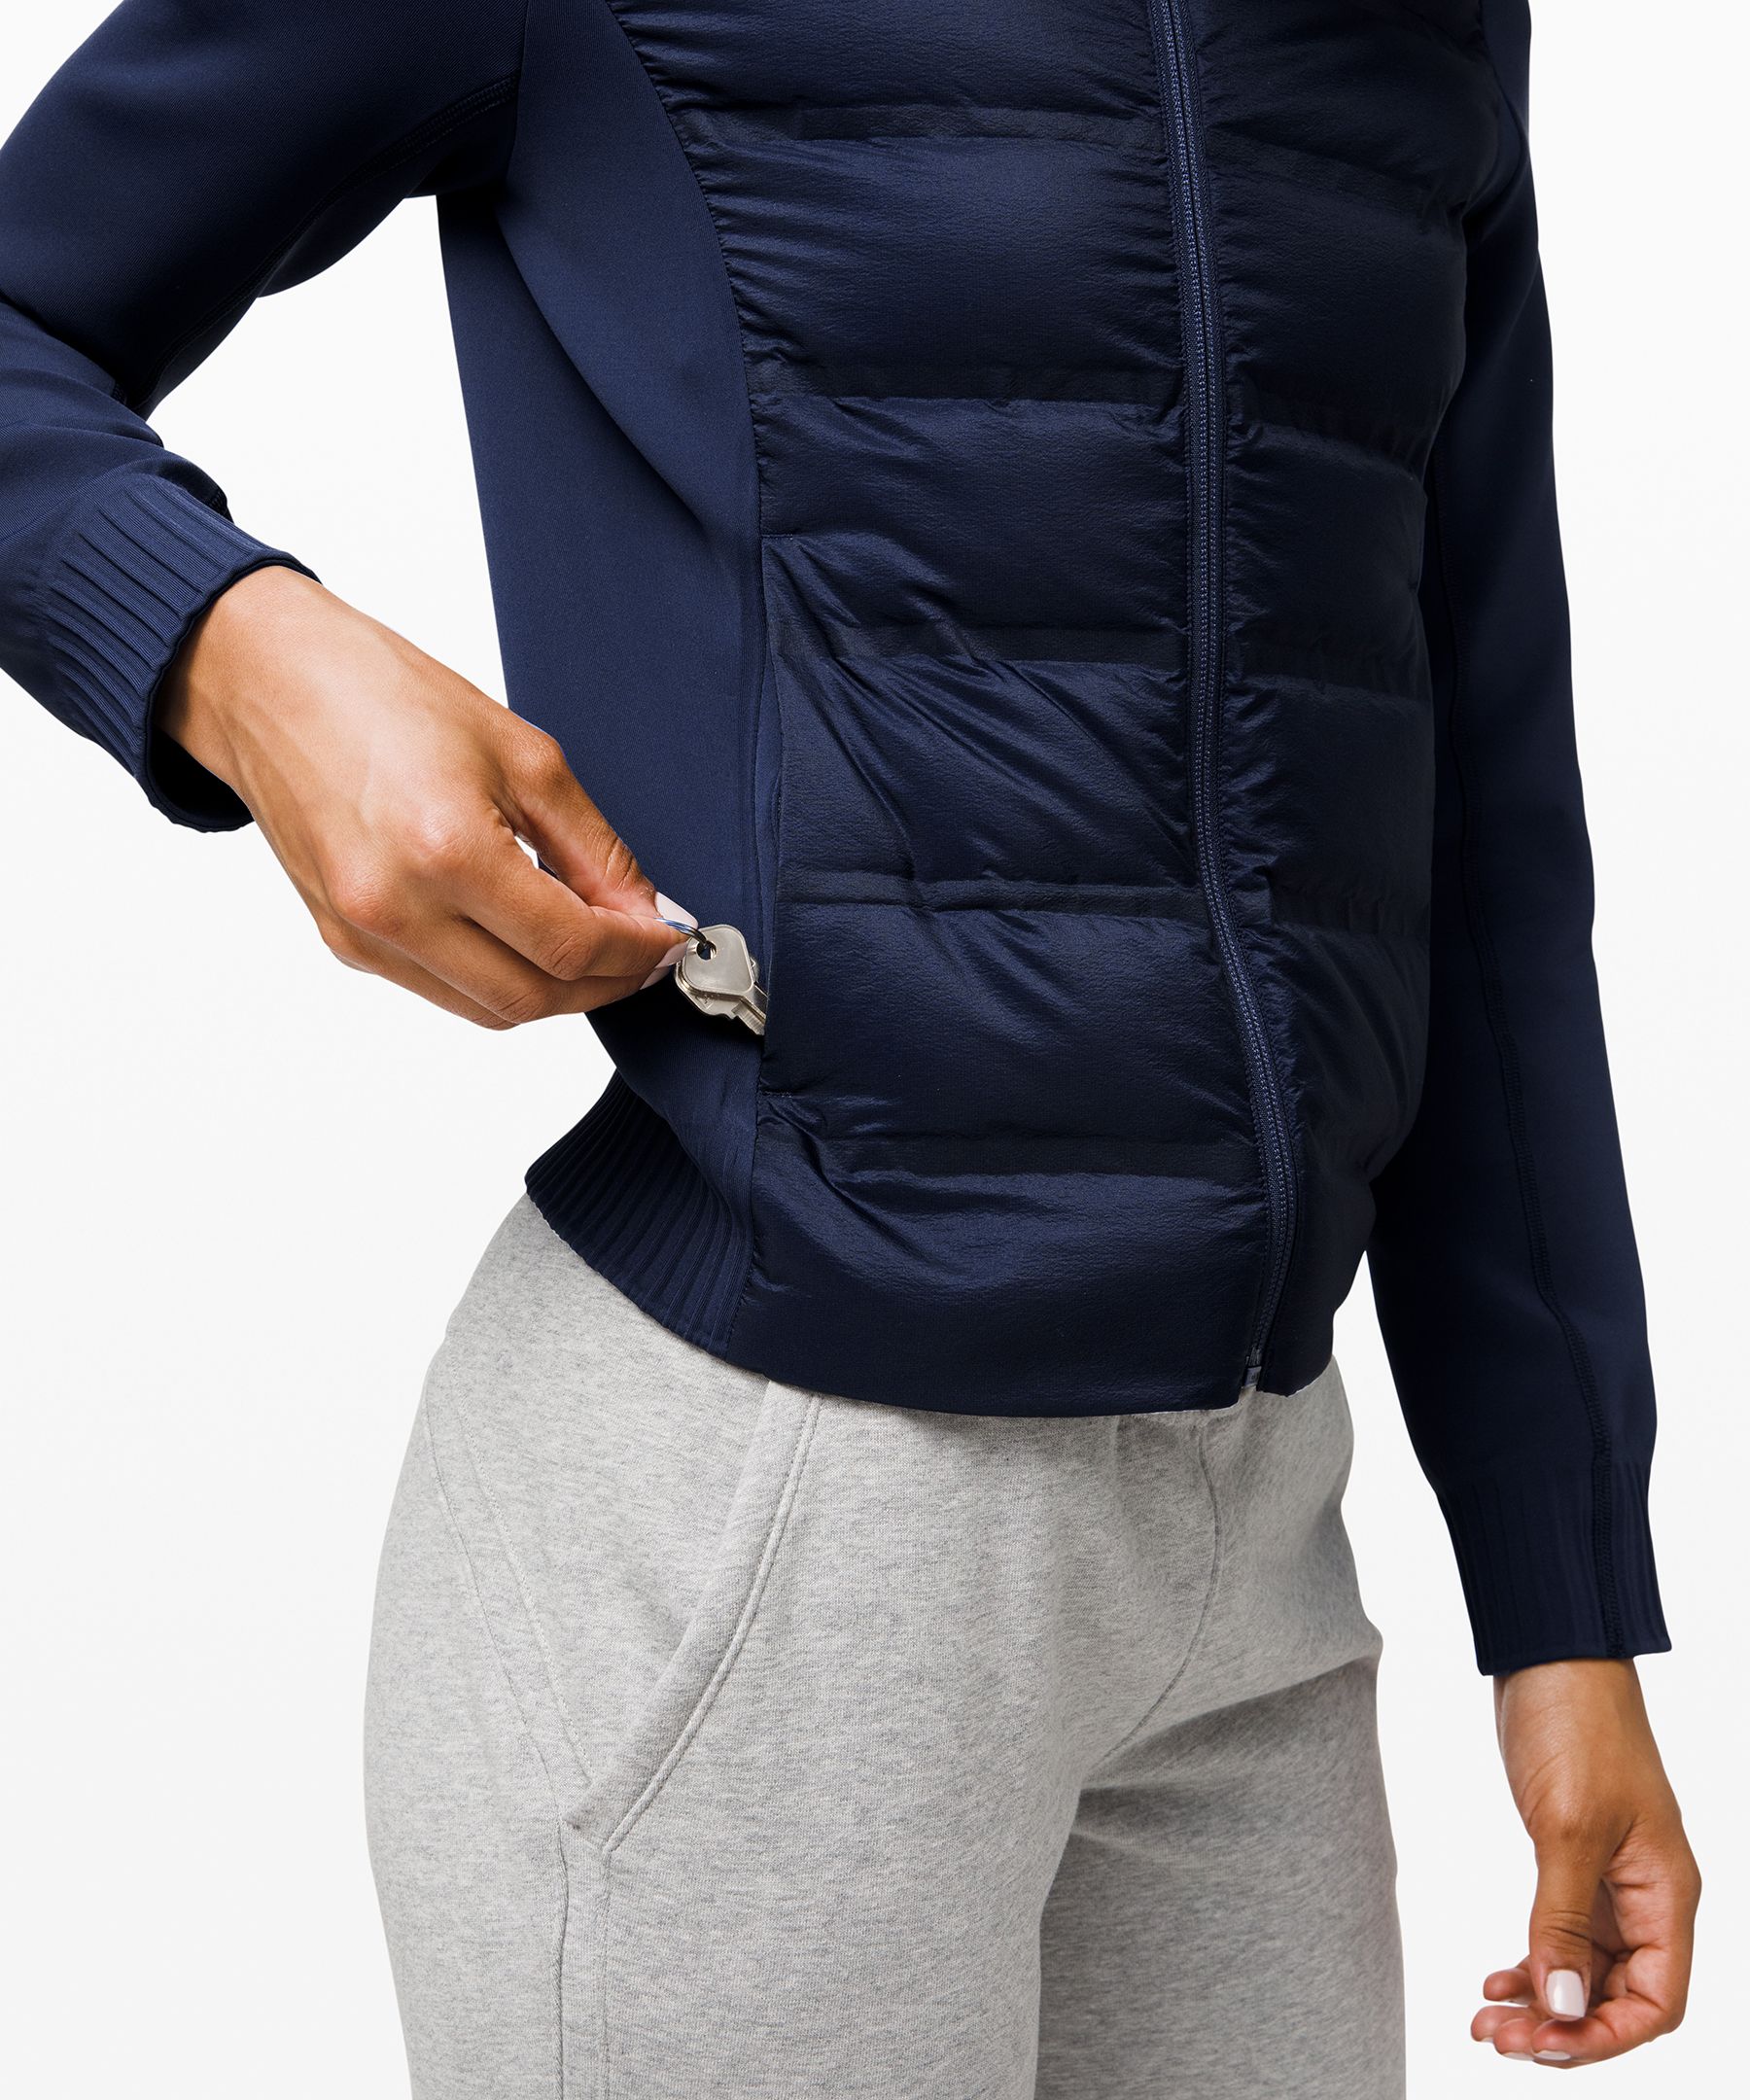 lululemon down and around jacket review